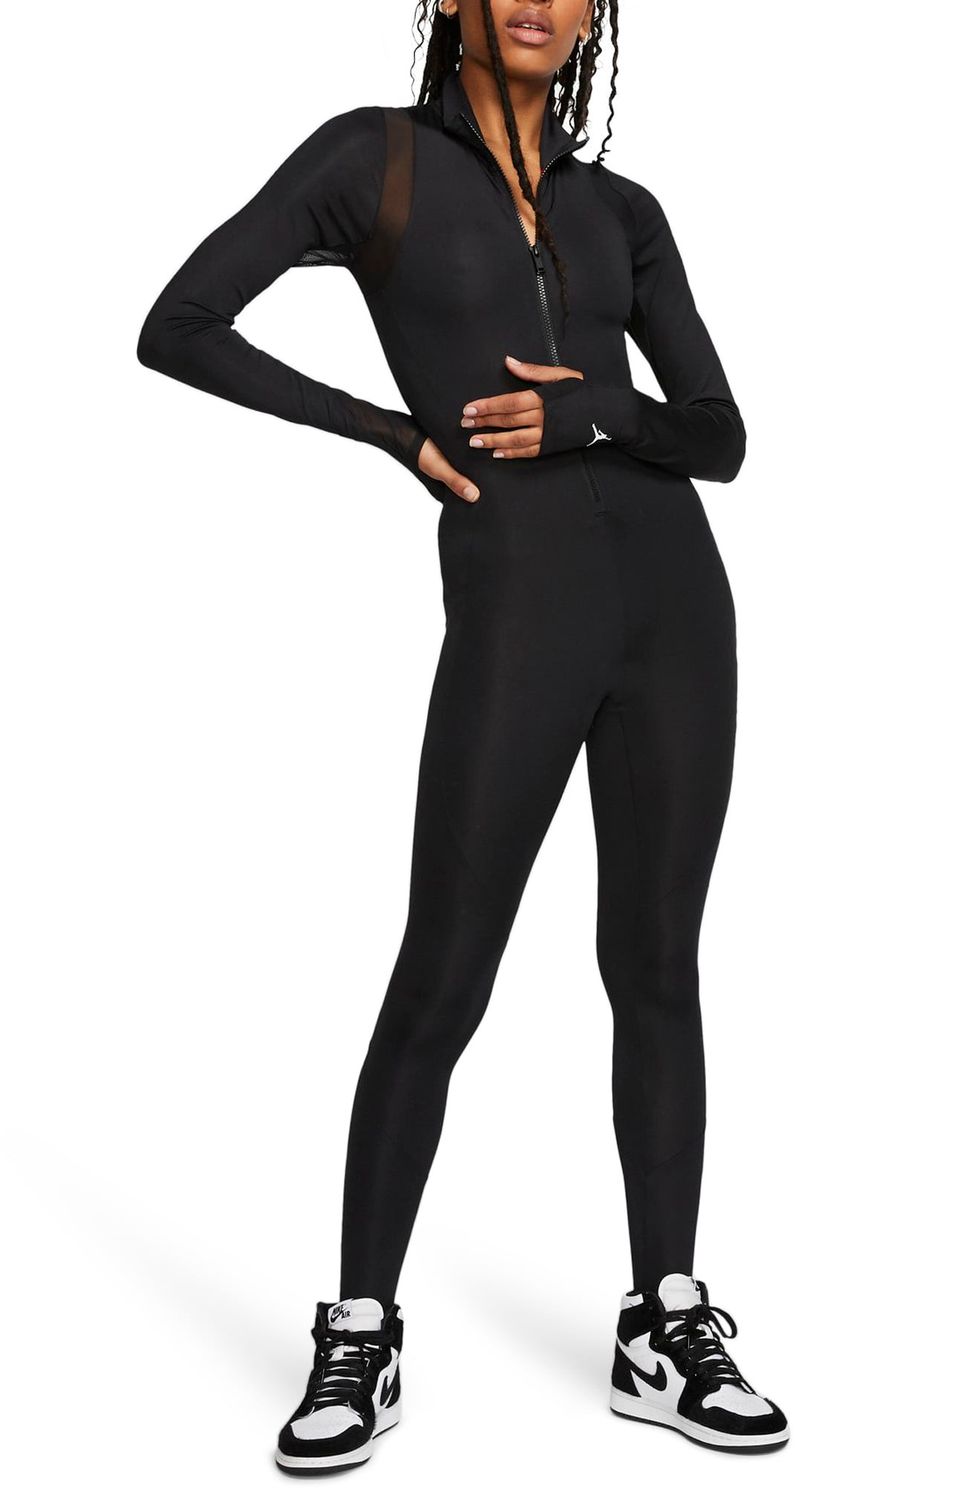 Full Zip Workout Clothes: Women's Activewear & Athletic Wear - Macy's